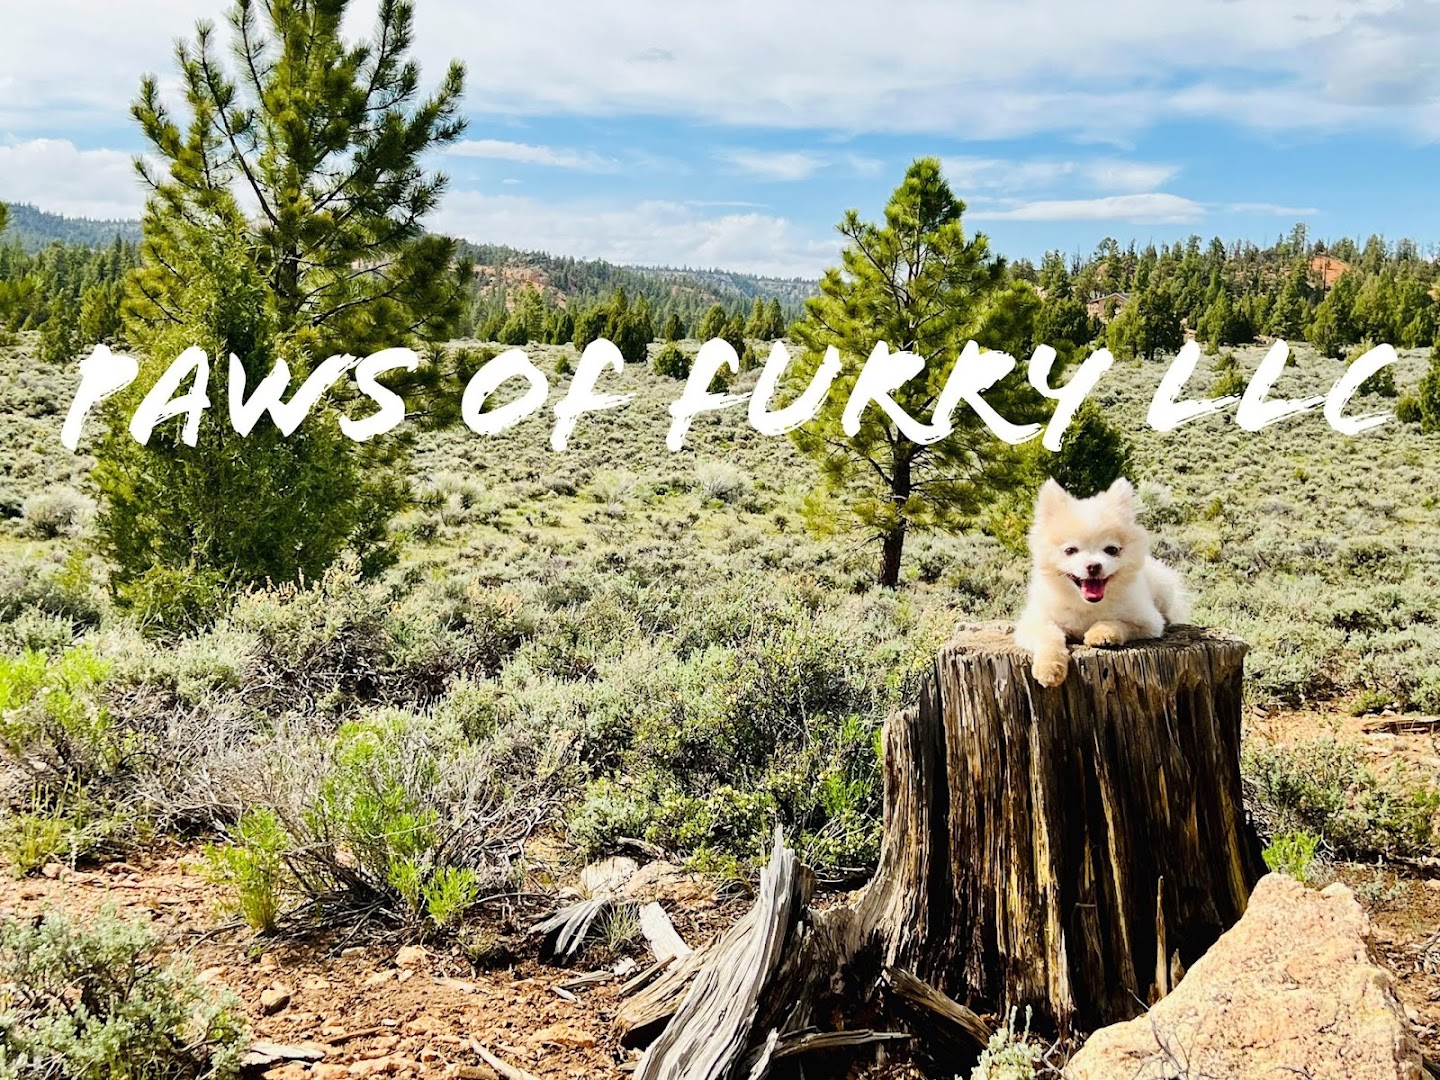 Paws of Furry LLC